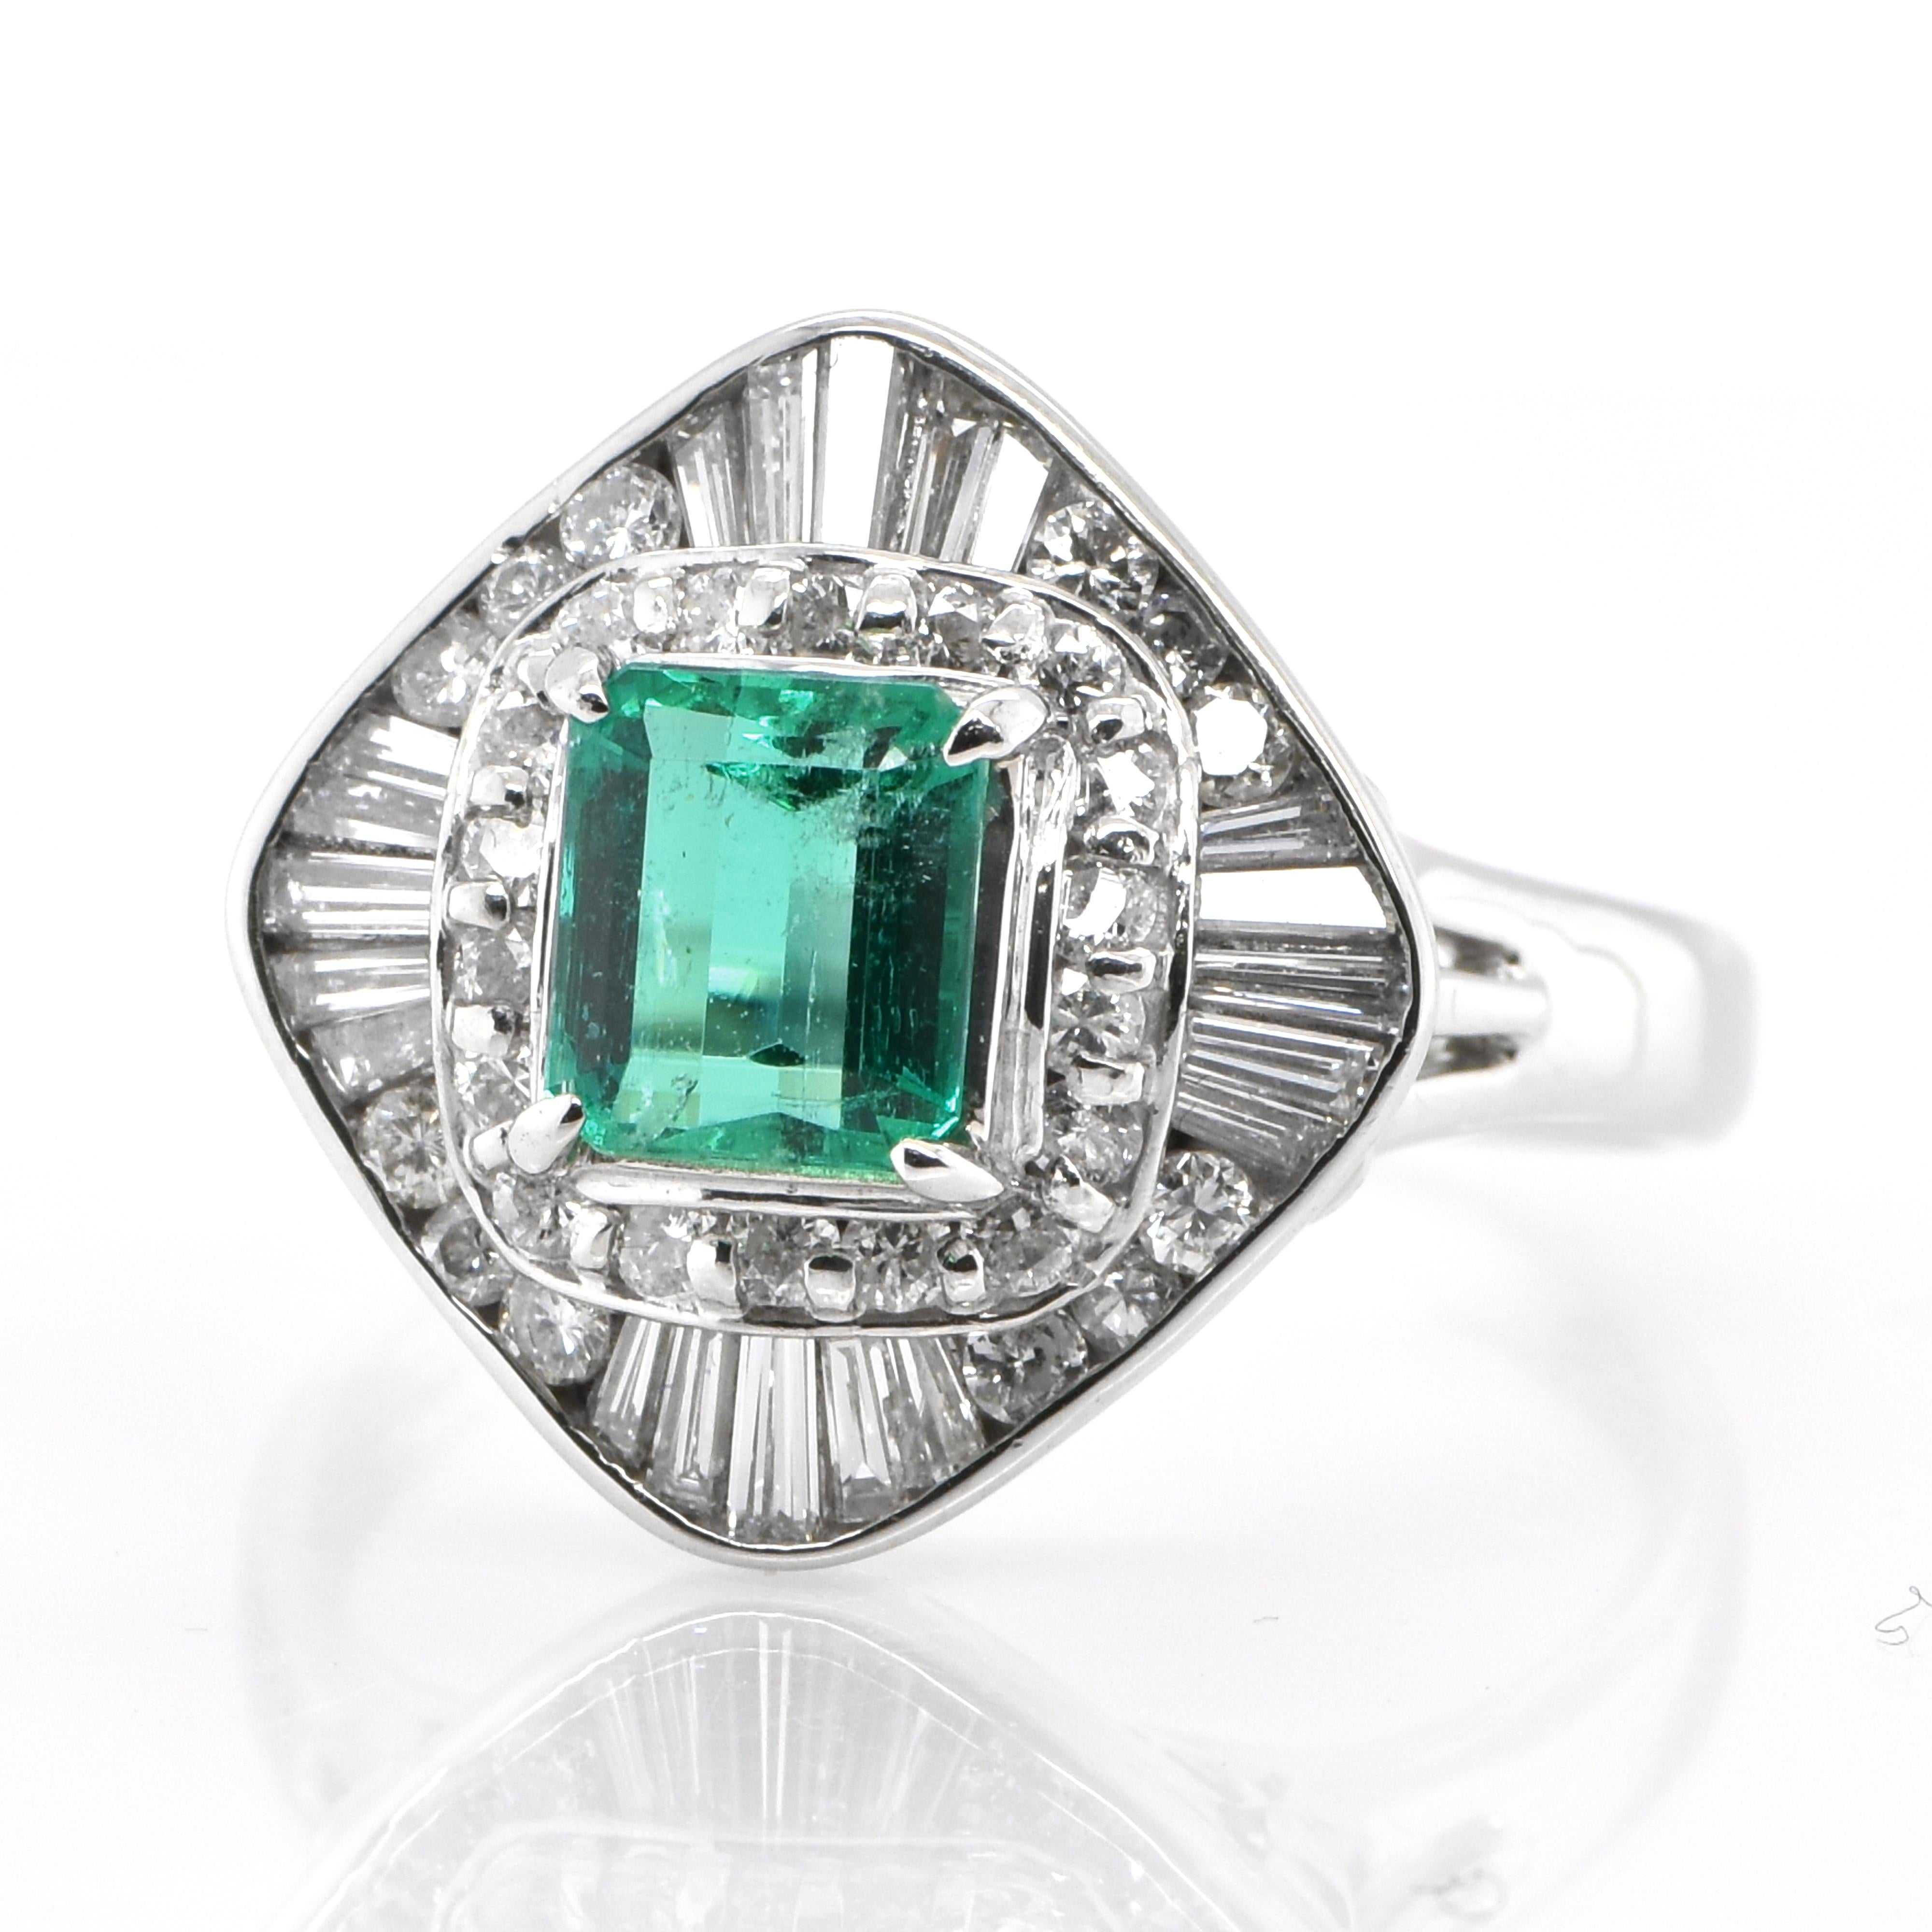 A stunning ring featuring a 0.96 Carat Natural Emerald and 0.85 Carats of Diamond Accents set in Platinum. People have admired emerald’s green for thousands of years. Emeralds have always been associated with the lushest landscapes and the richest